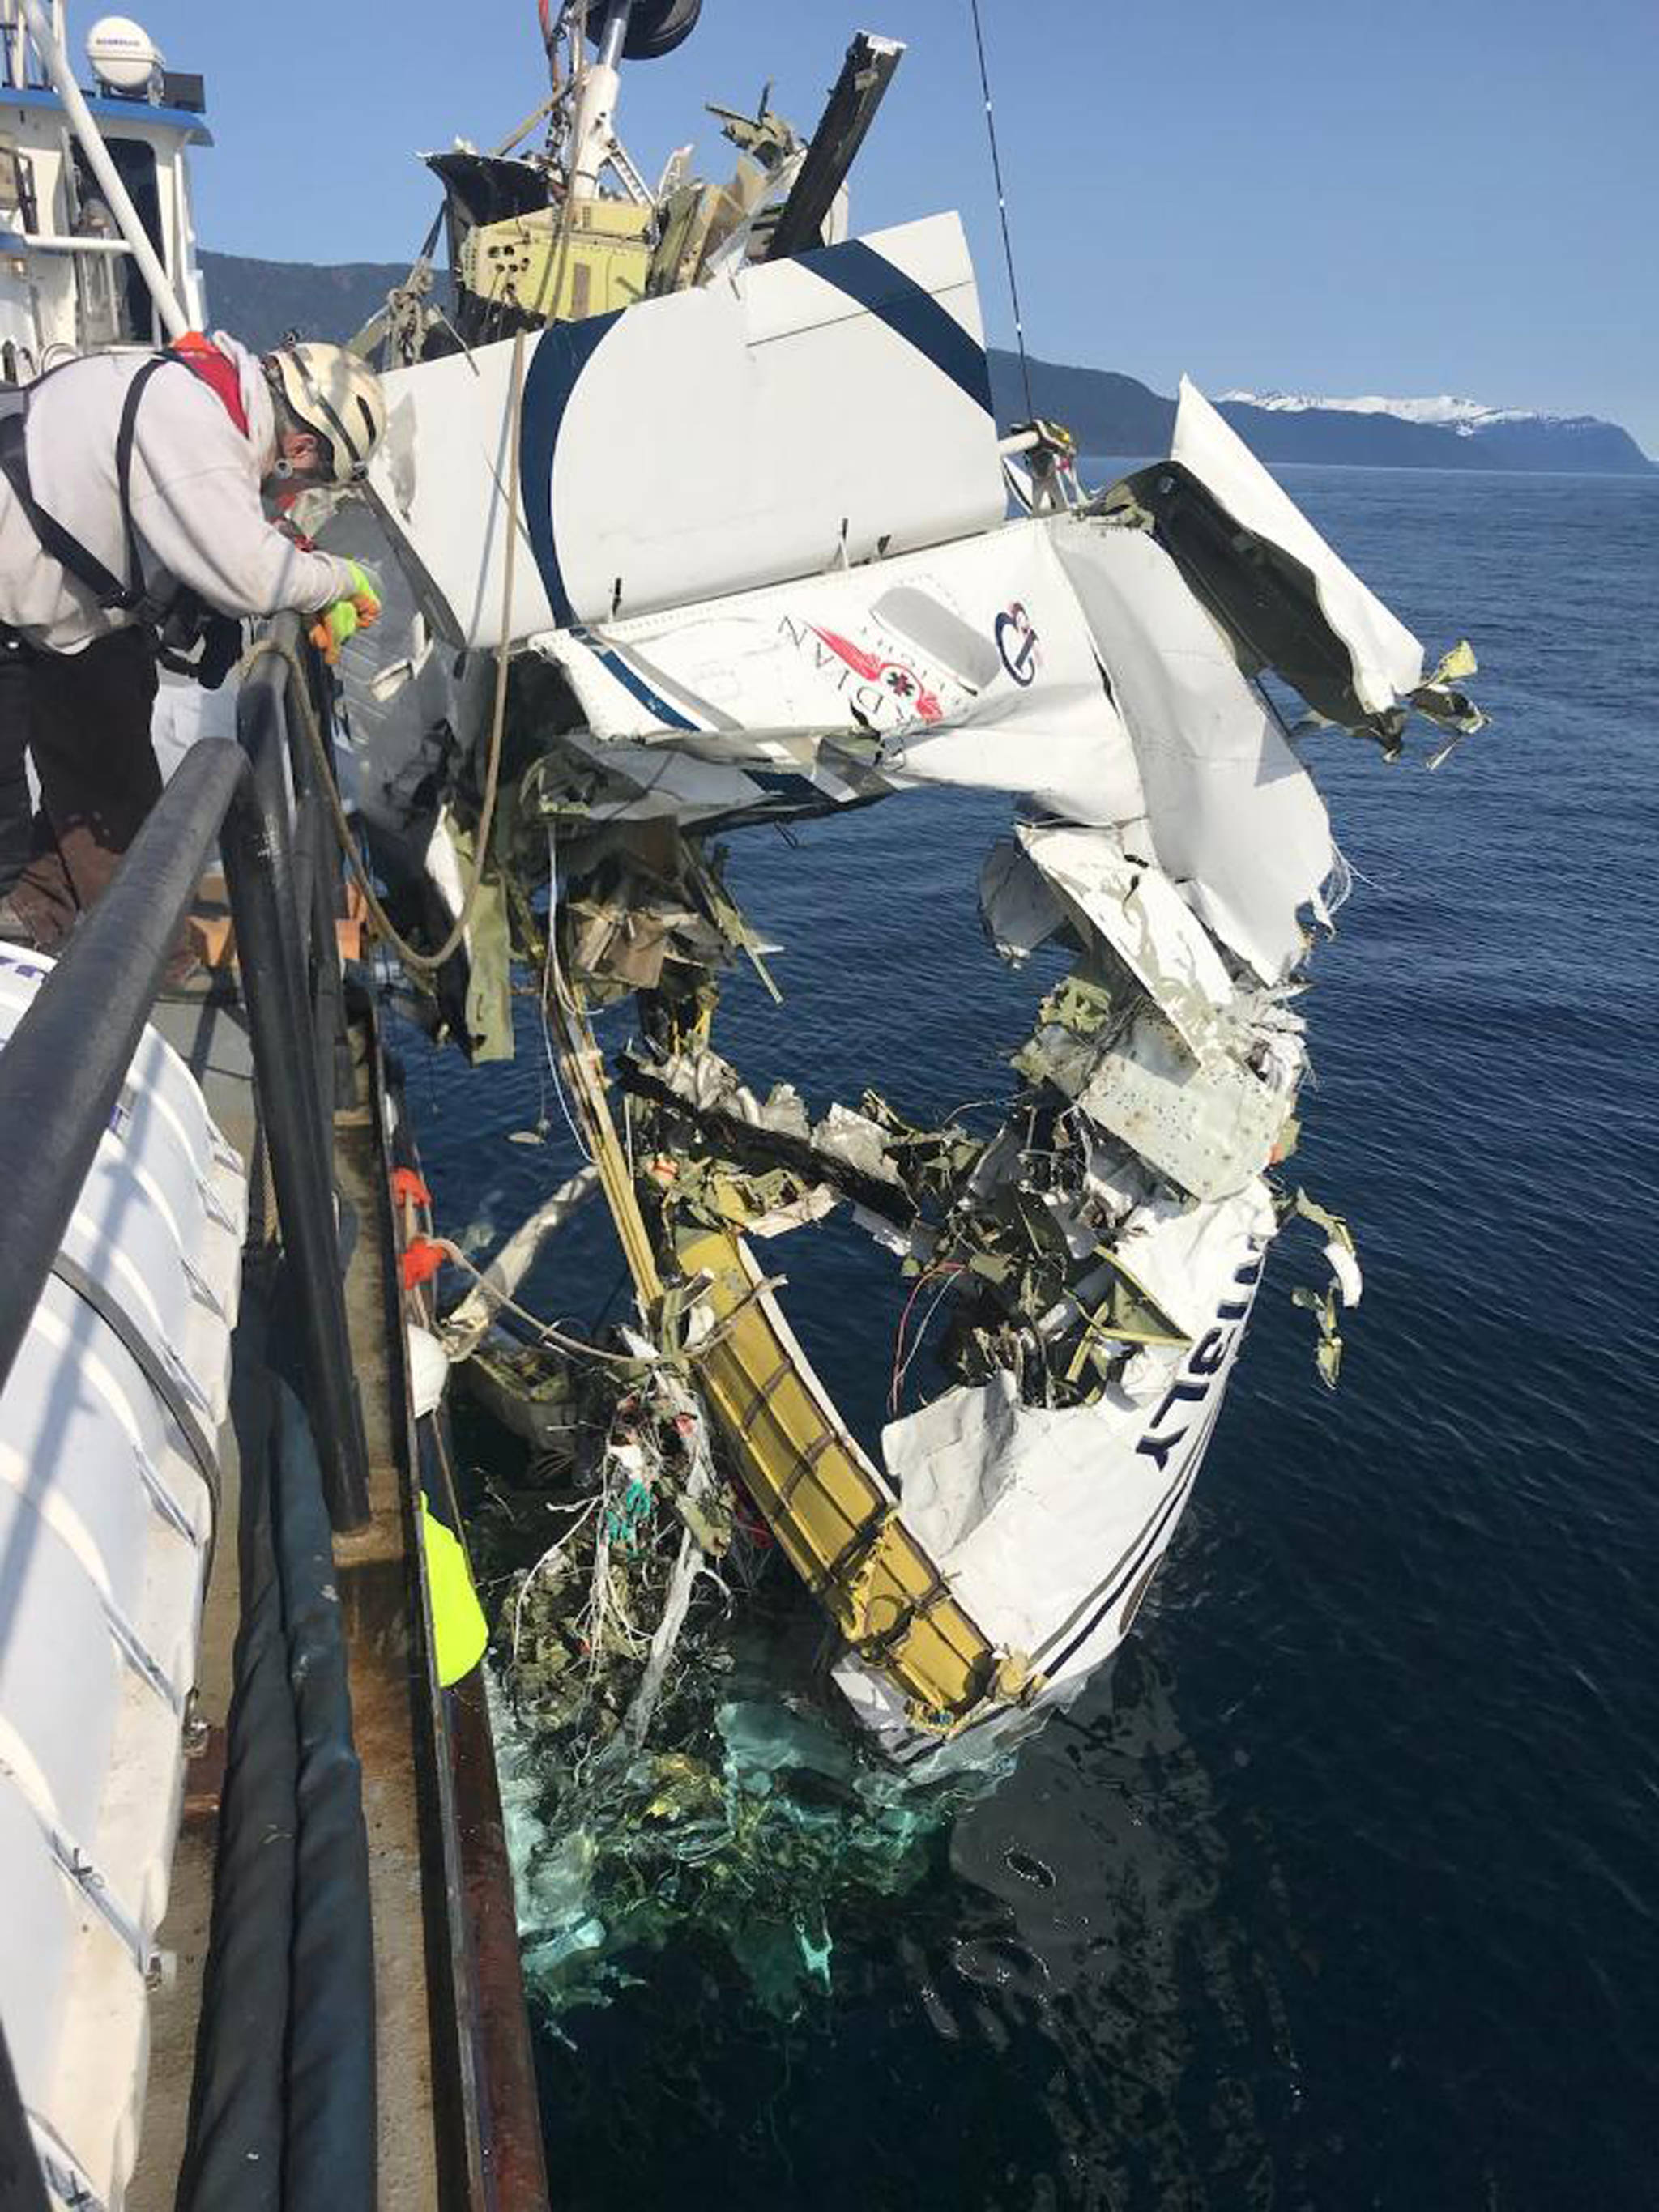 After an extensive underwater search, the wreckage of a Beechcraft B200 was recovered from the ocean waters of Fredrick Sound near Kake. Alaska. (Courtesy Photo | National Transportation Safety Board)